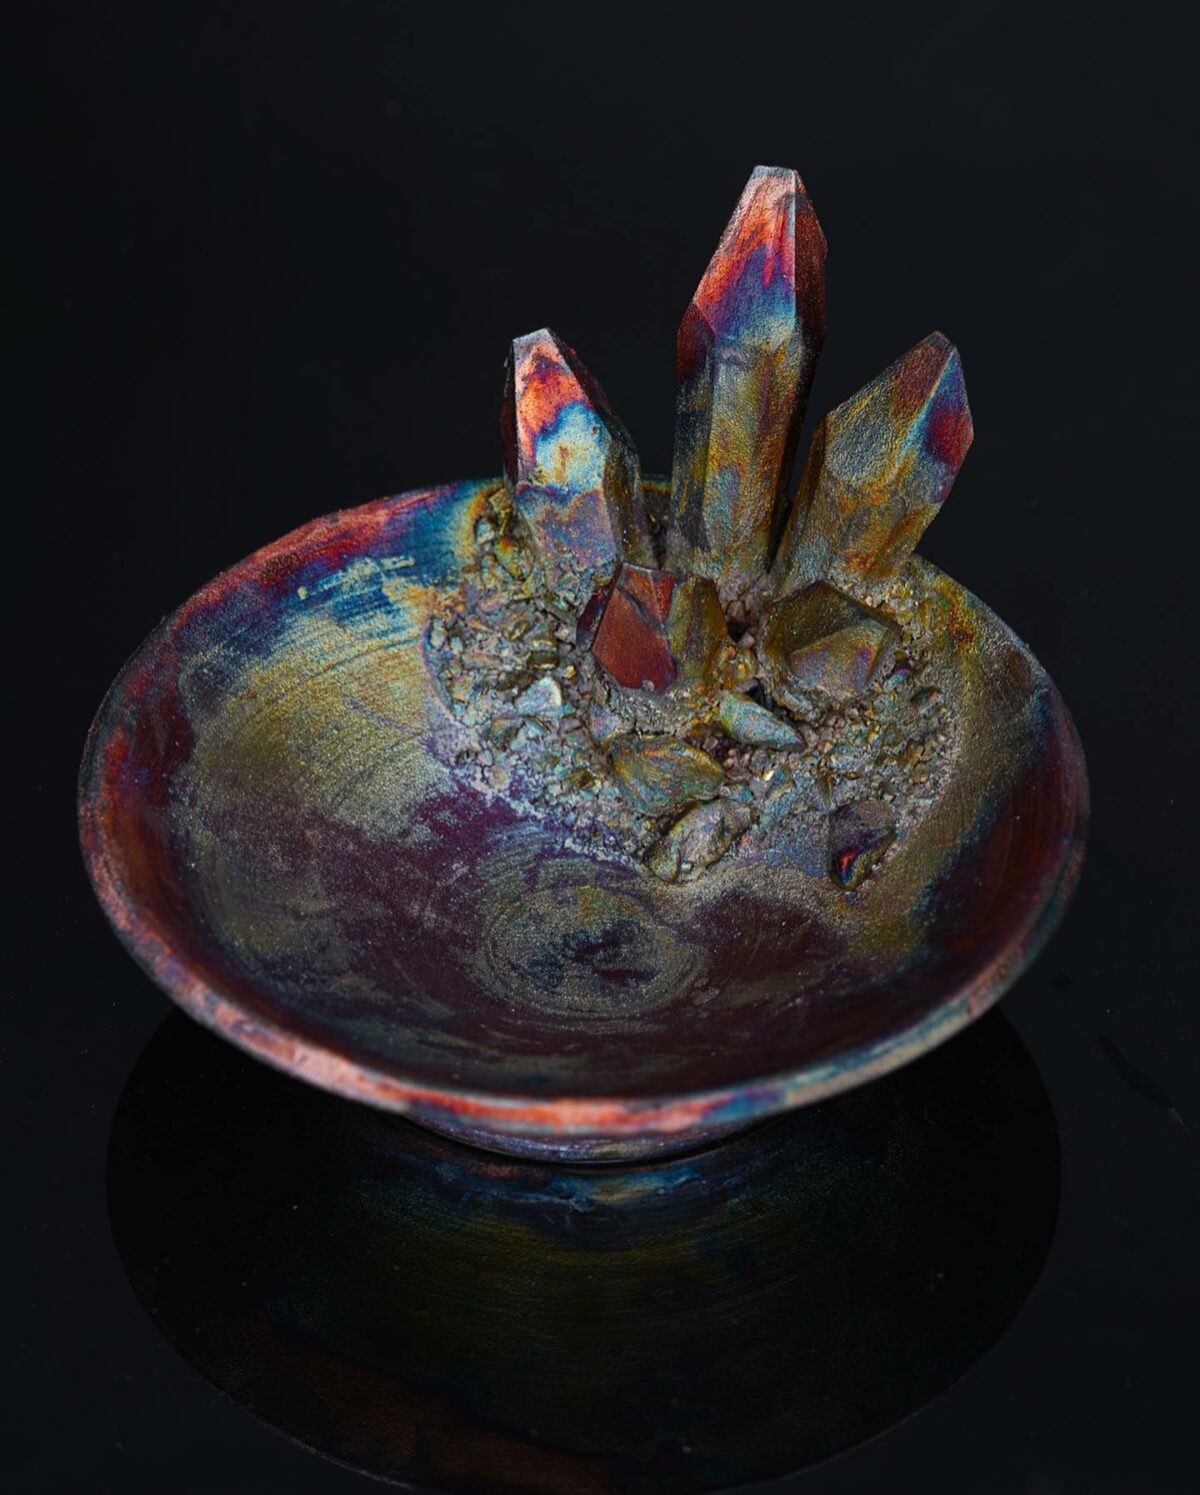 Lush Ceramic Vessels Decorated With Colorful Crystals By Collin Lynch 17